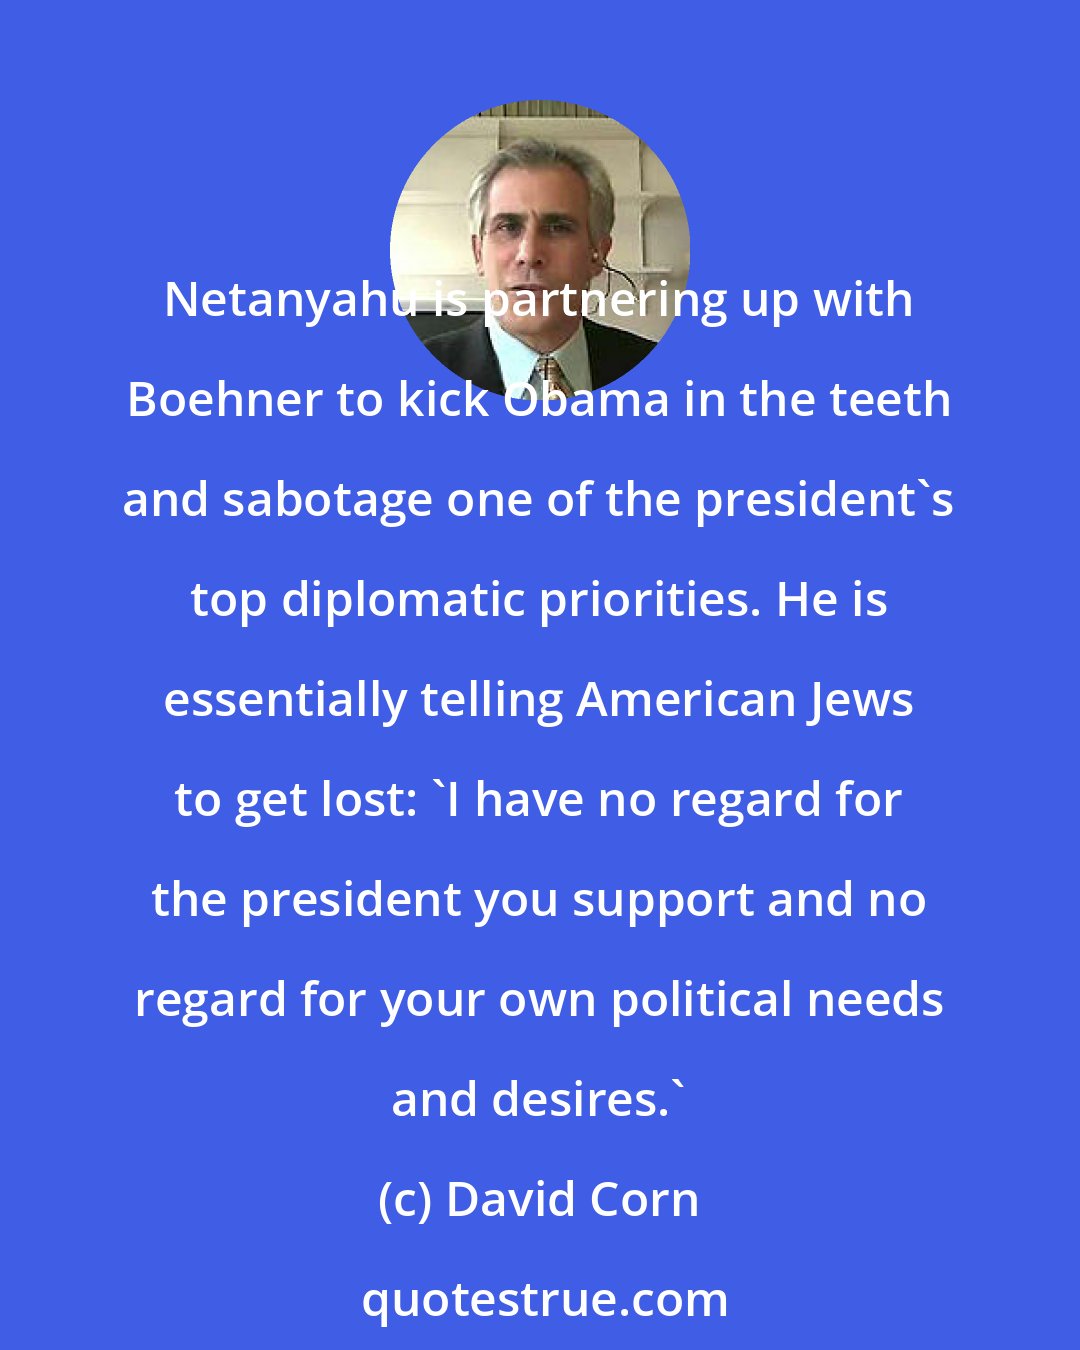 David Corn: Netanyahu is partnering up with Boehner to kick Obama in the teeth and sabotage one of the president's top diplomatic priorities. He is essentially telling American Jews to get lost: 'I have no regard for the president you support and no regard for your own political needs and desires.'